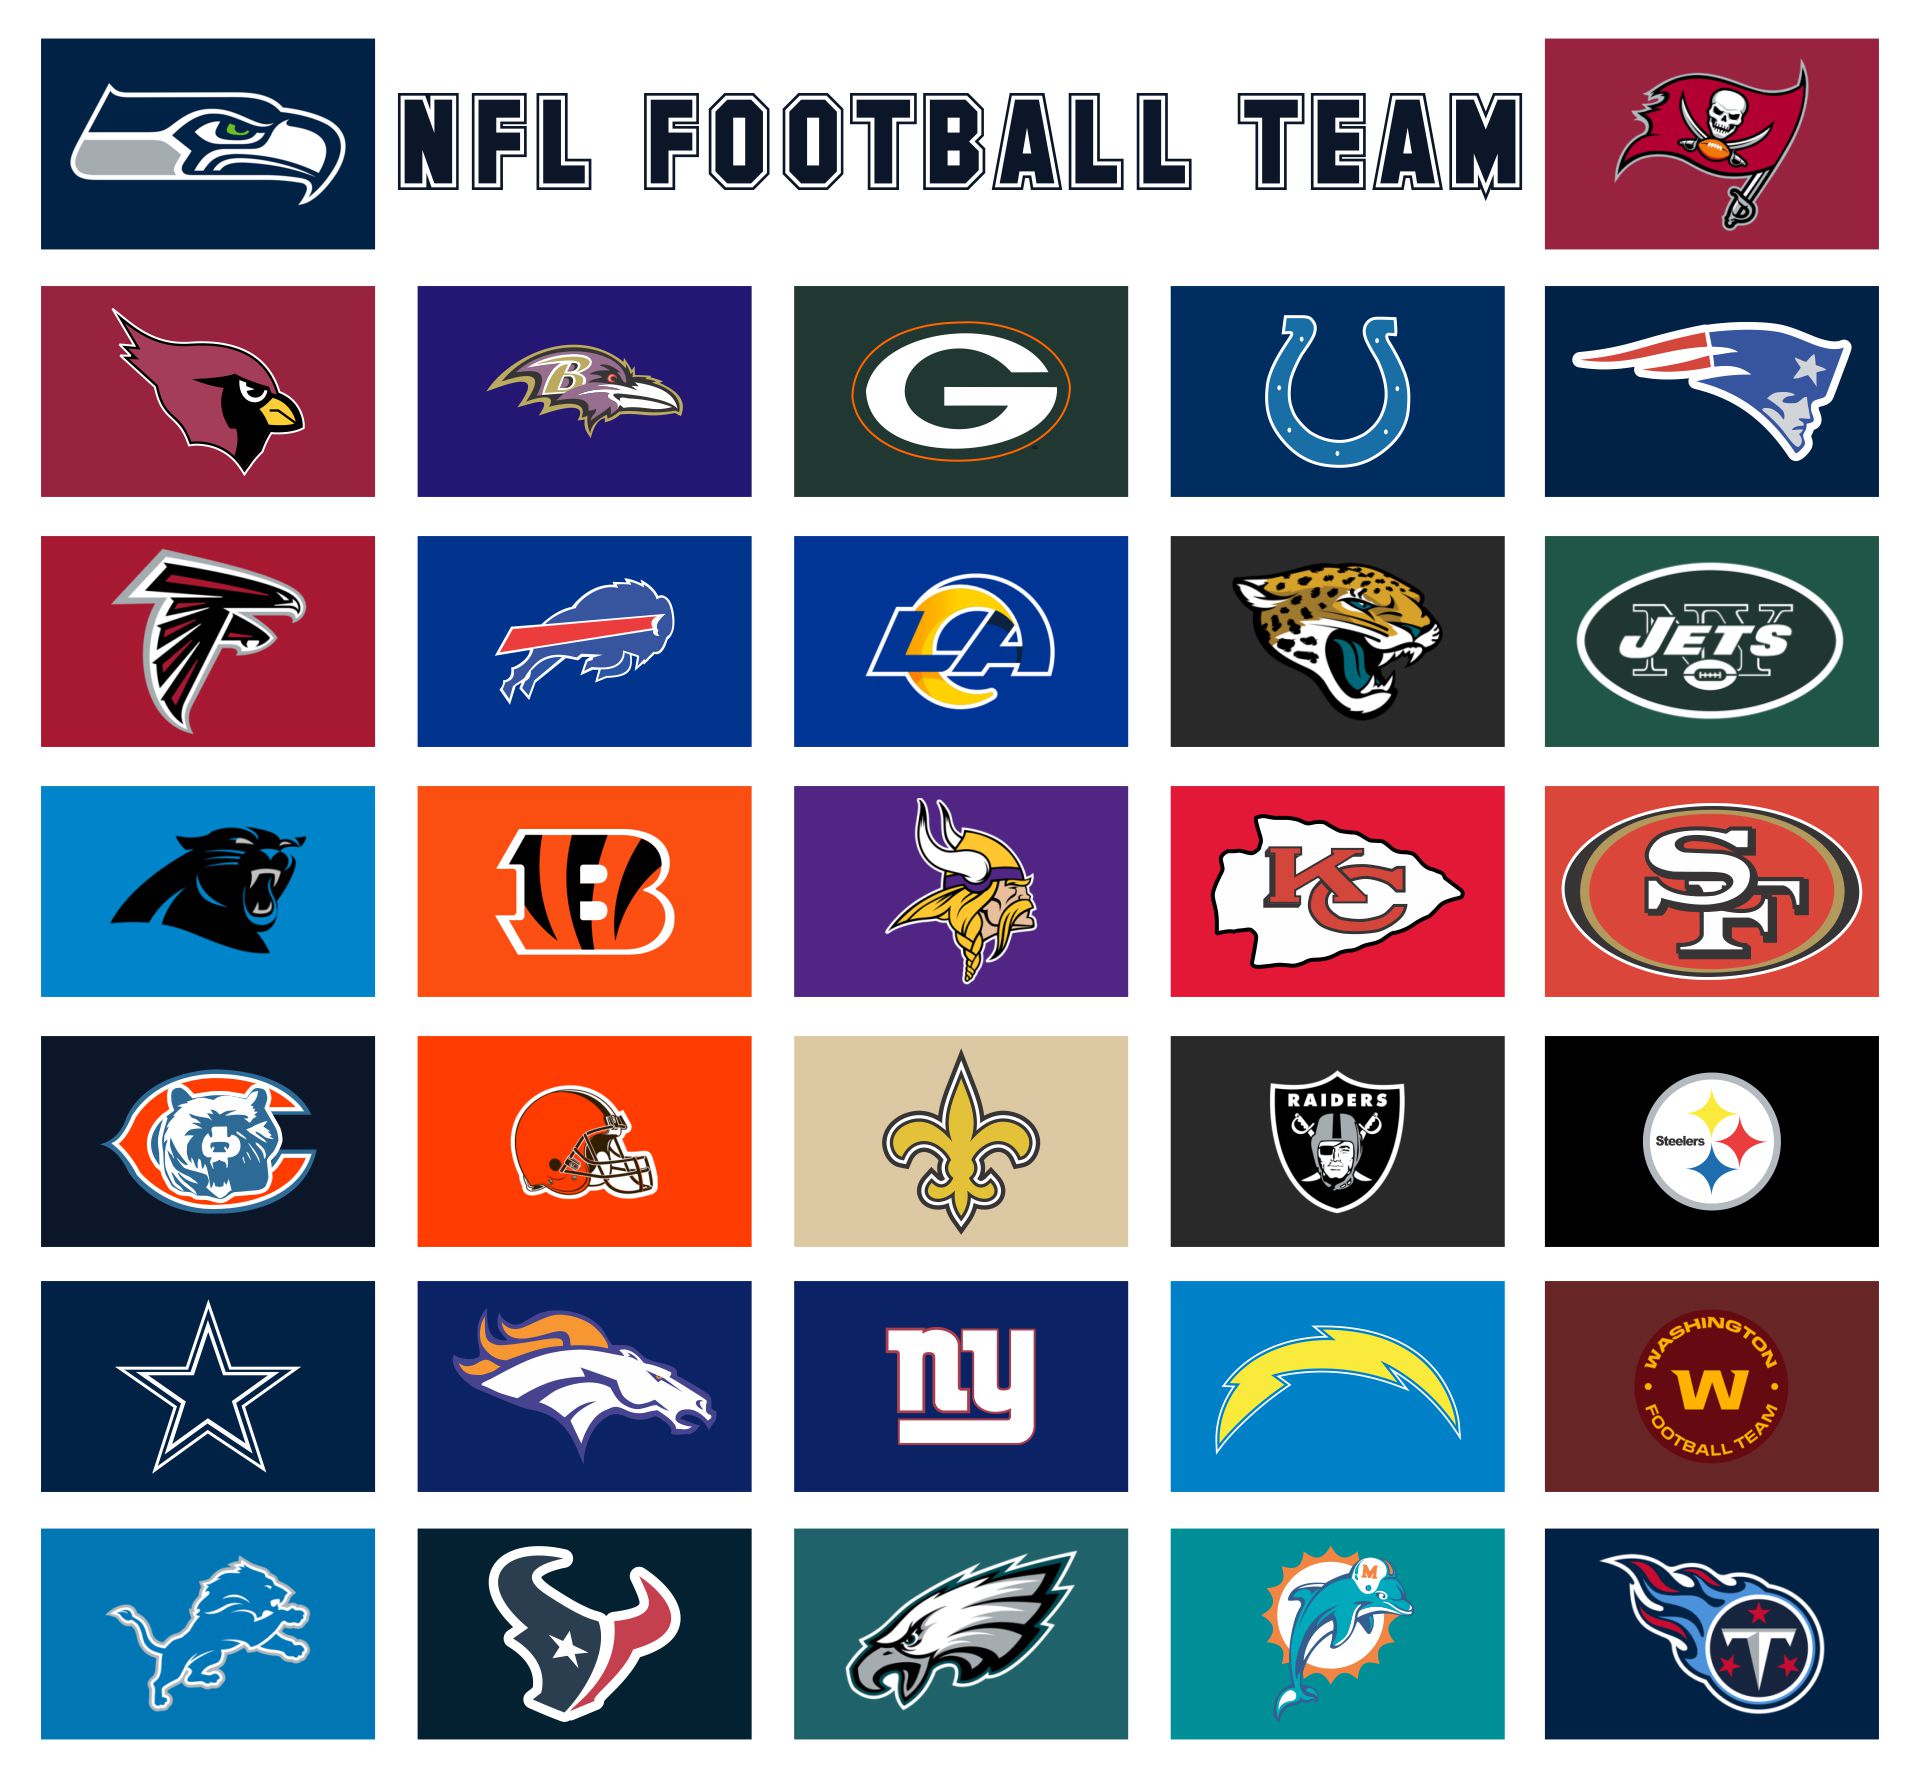 Nfl Team Logos And Names